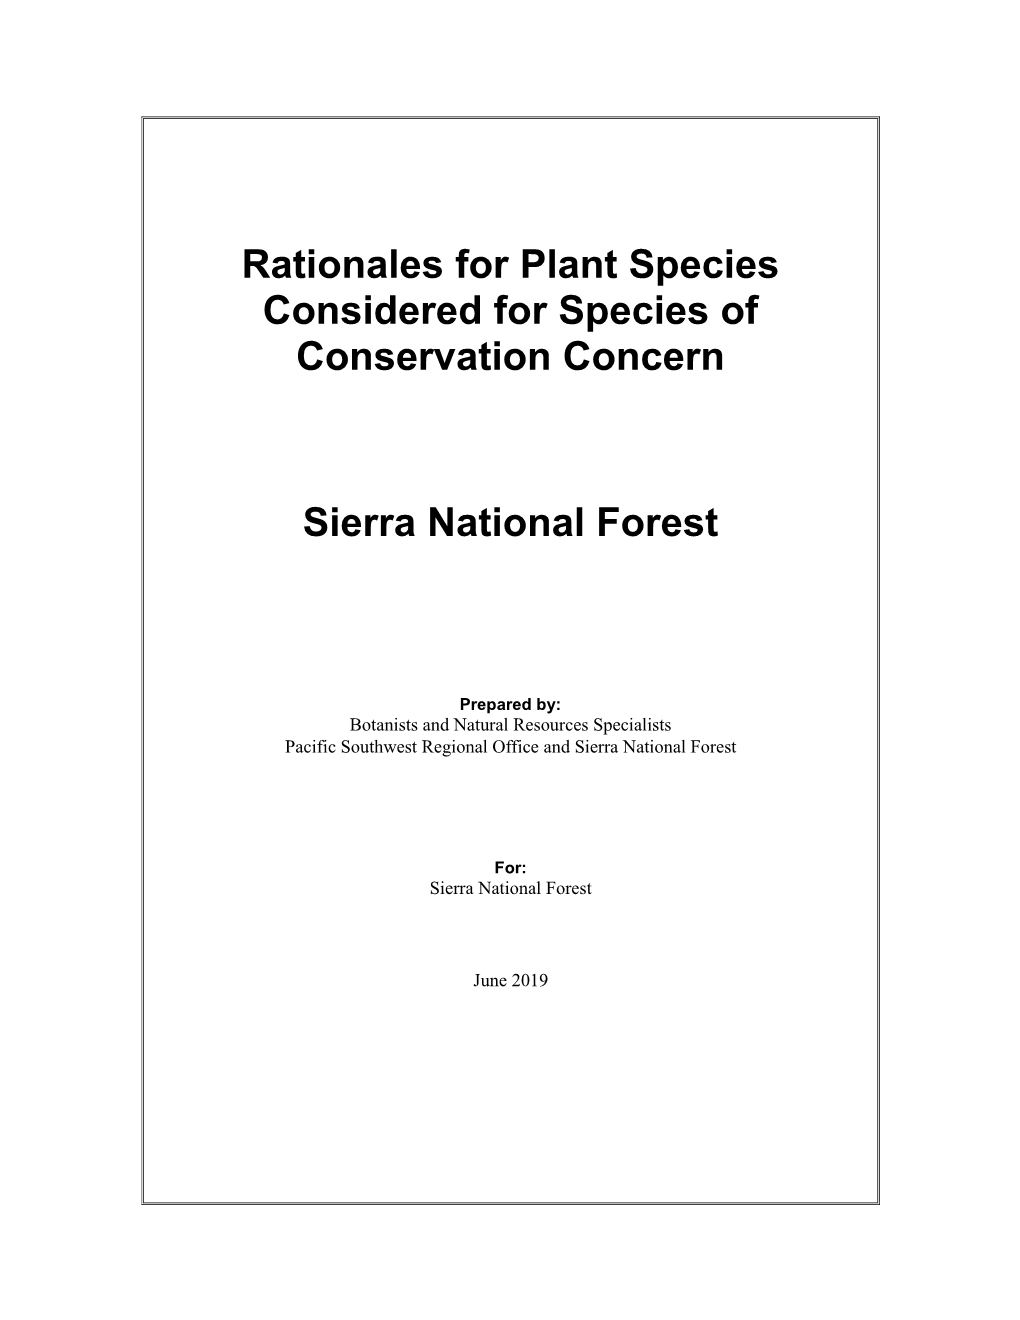 Rationales for Plant Species Considered for Species of Conservation Concern